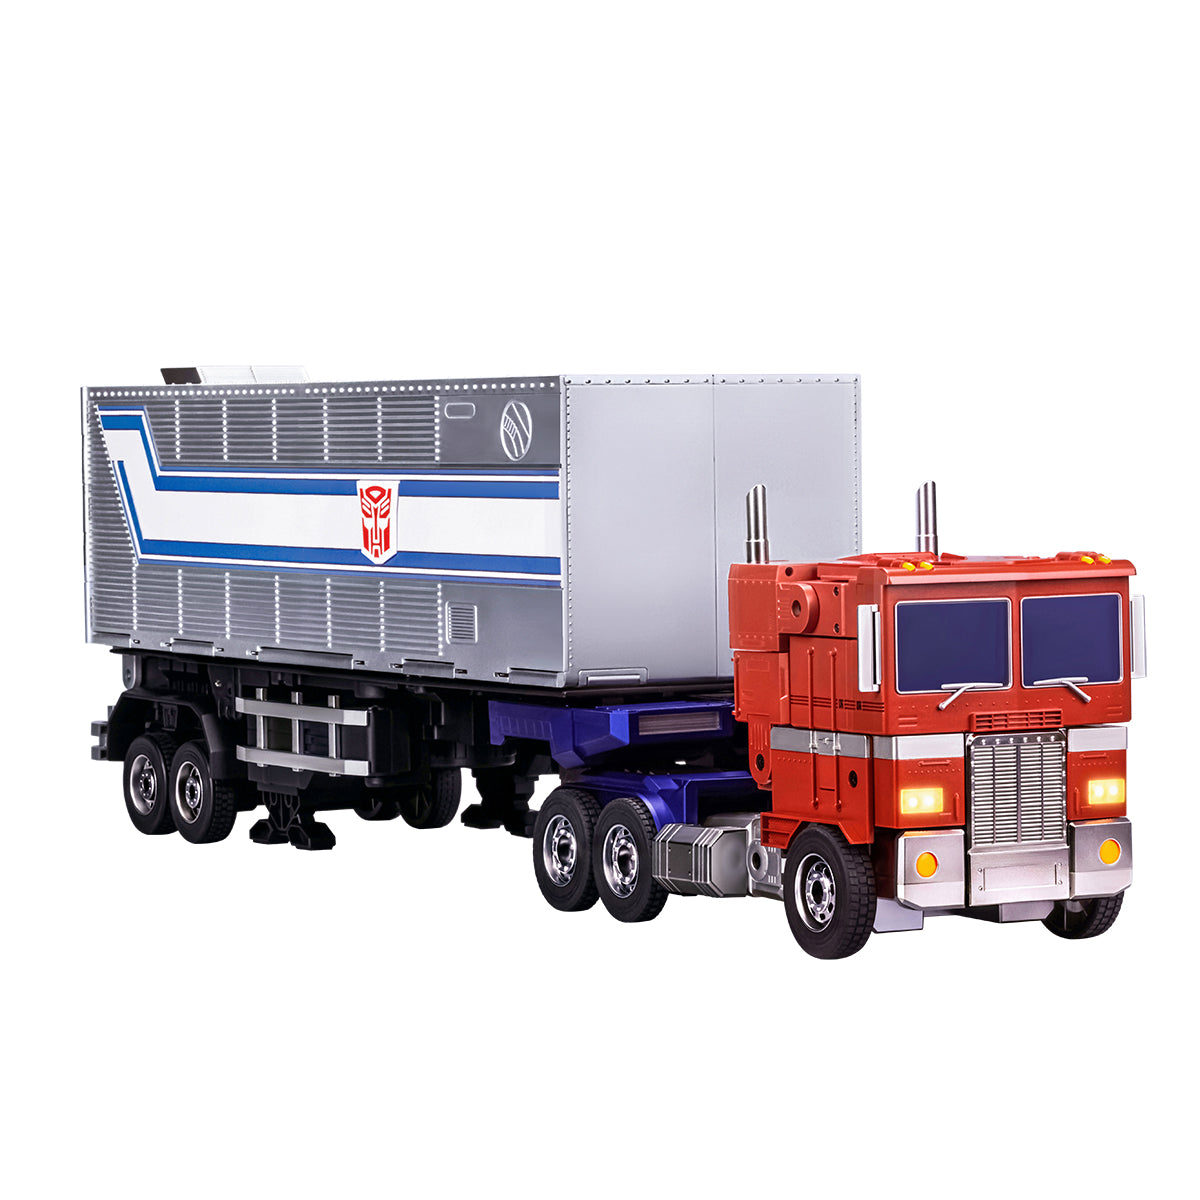 transformers 3 optimus prime truck with trailer